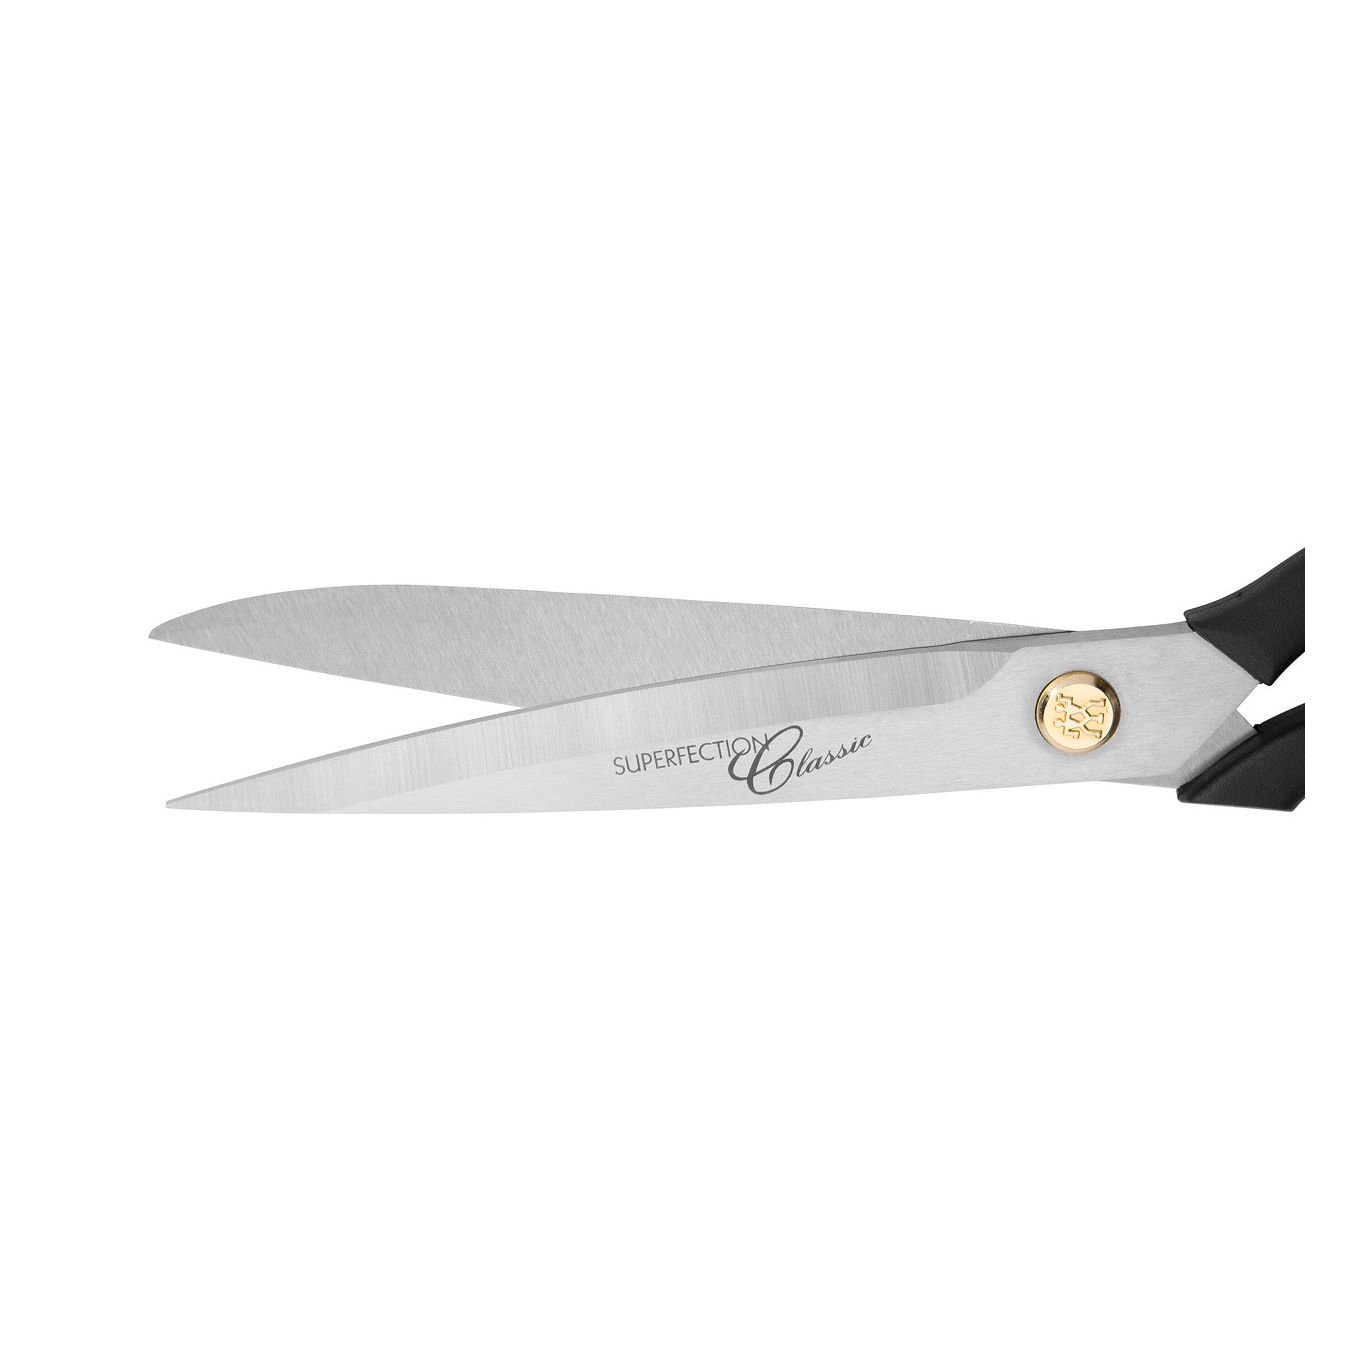 Sewing Machine Services Canada - Zwilling J.A Henckels Scissors